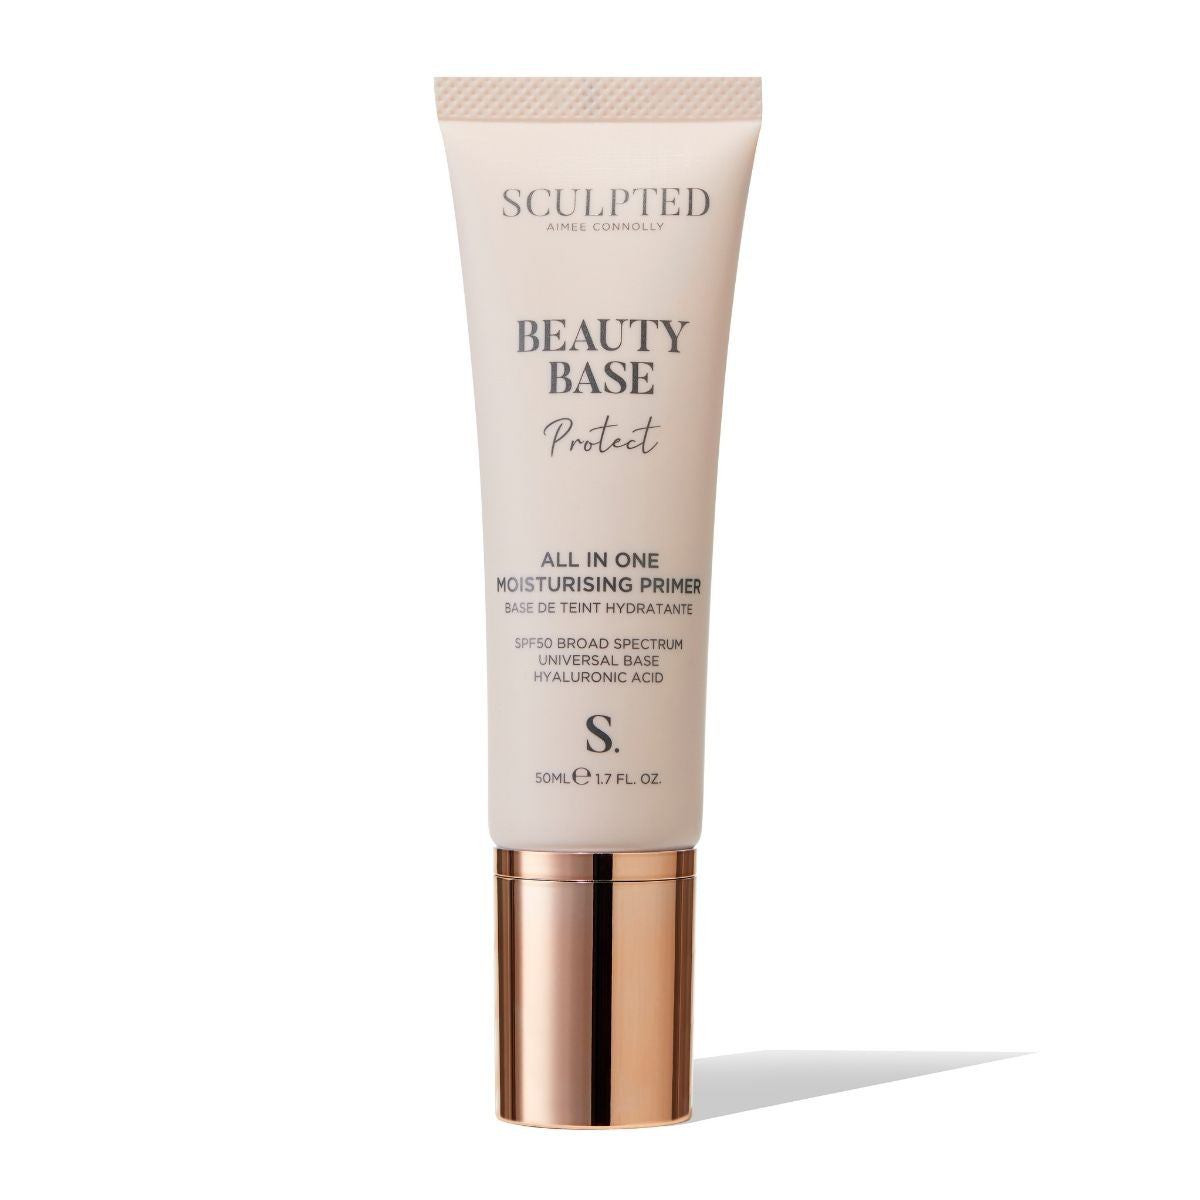 Sculpted By Aimee Connolly Beauty Base Protect SPF 50 Primer